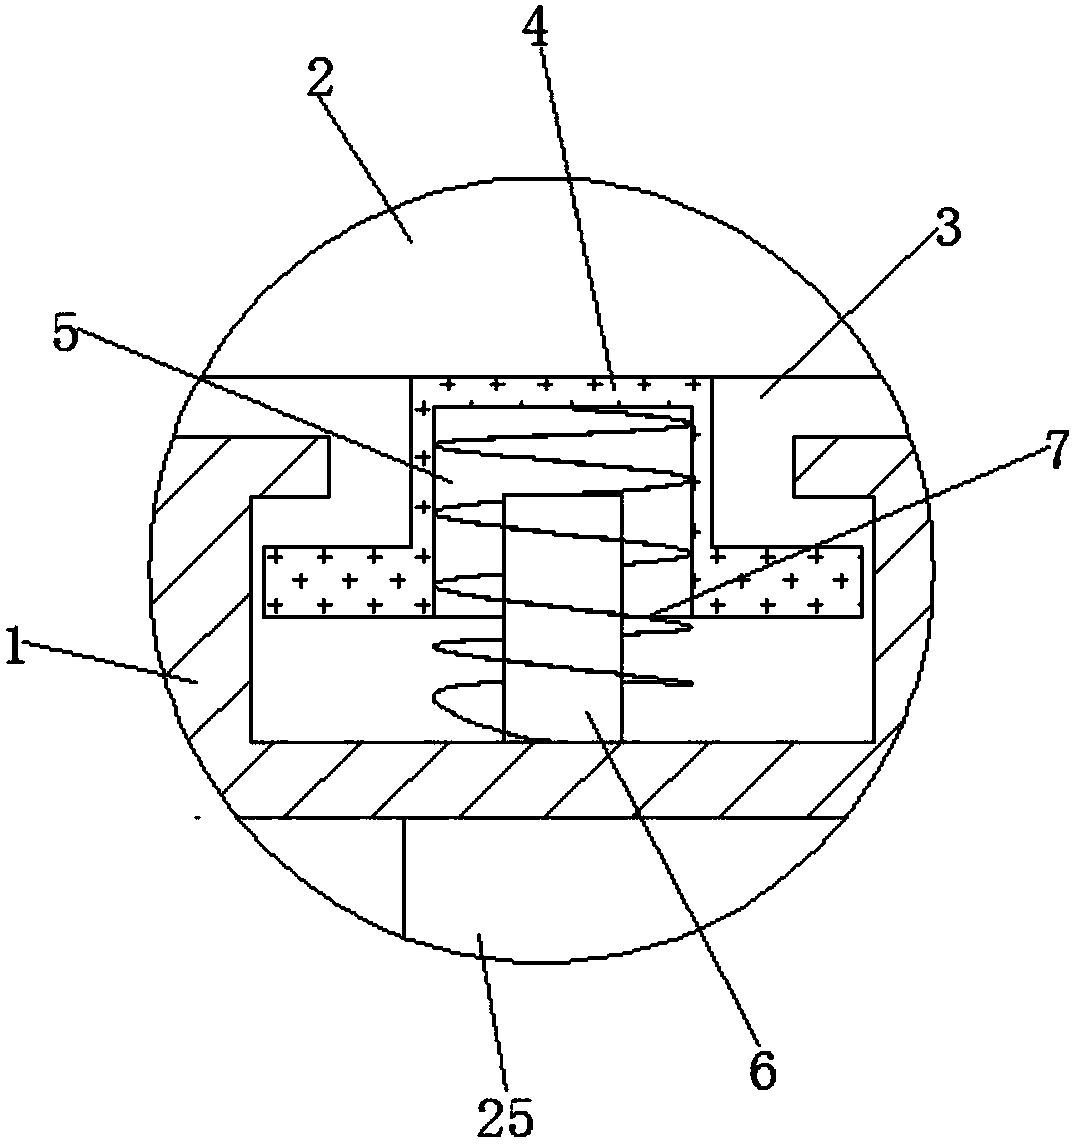 Directional measuring instrument with intelligent voice system